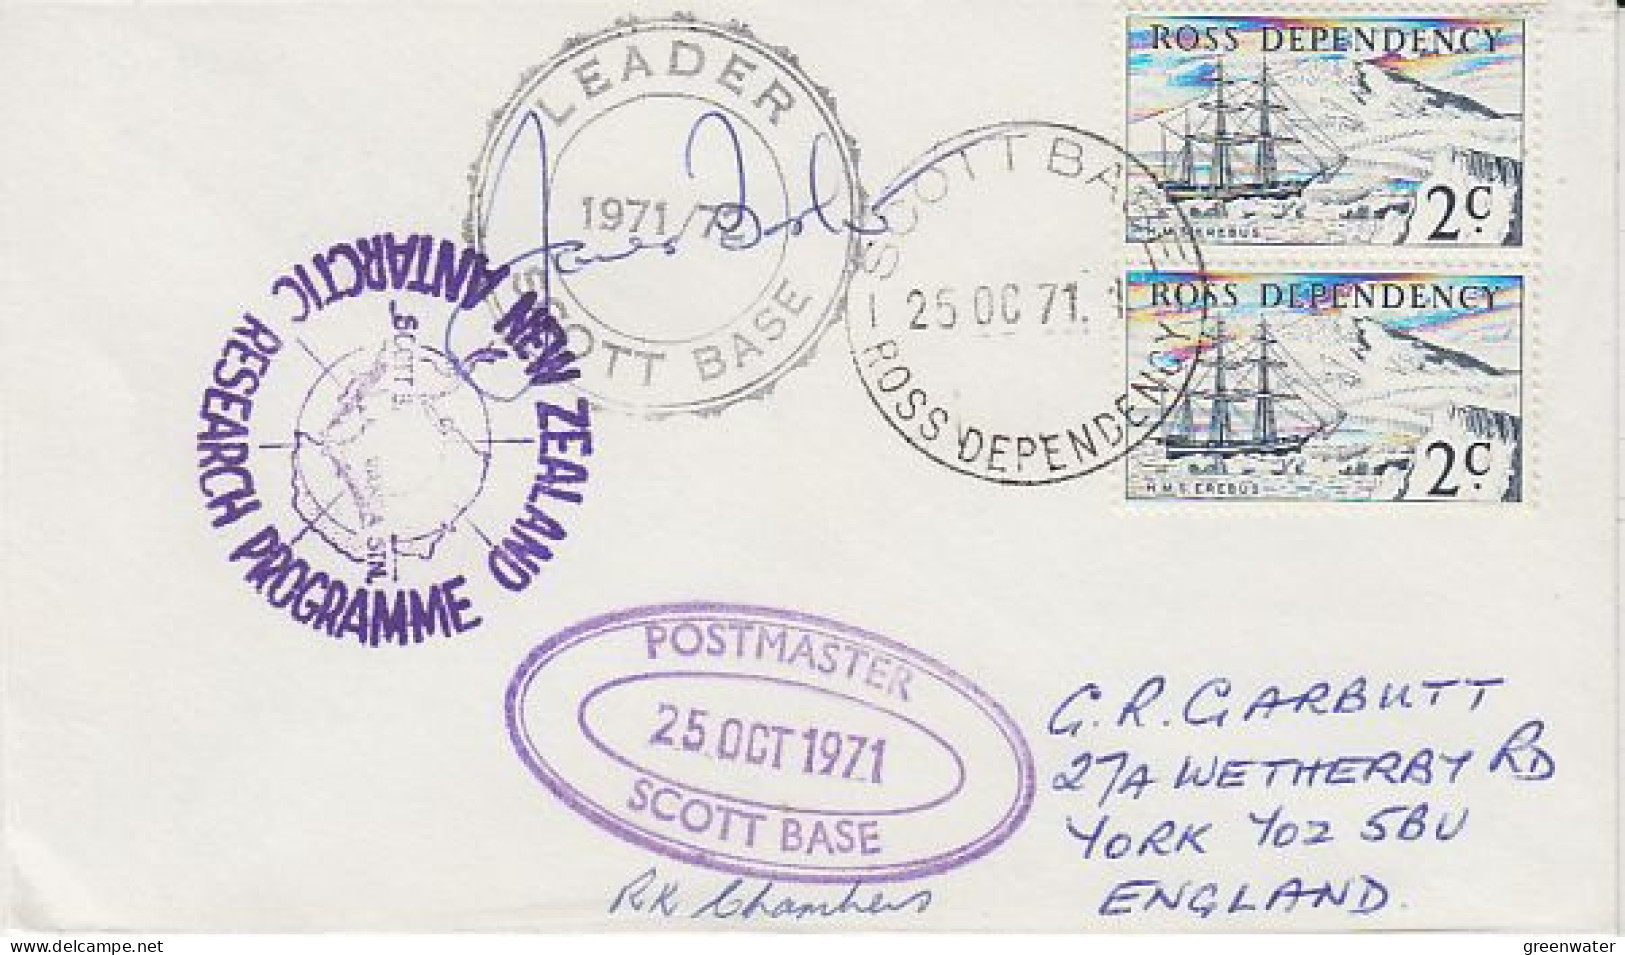 Ross Dependency NZ Antarctic Research Programme Signatures Leader Scott Base & PostmasterCa Scott Base 25 OC 1971(RO190) - Covers & Documents